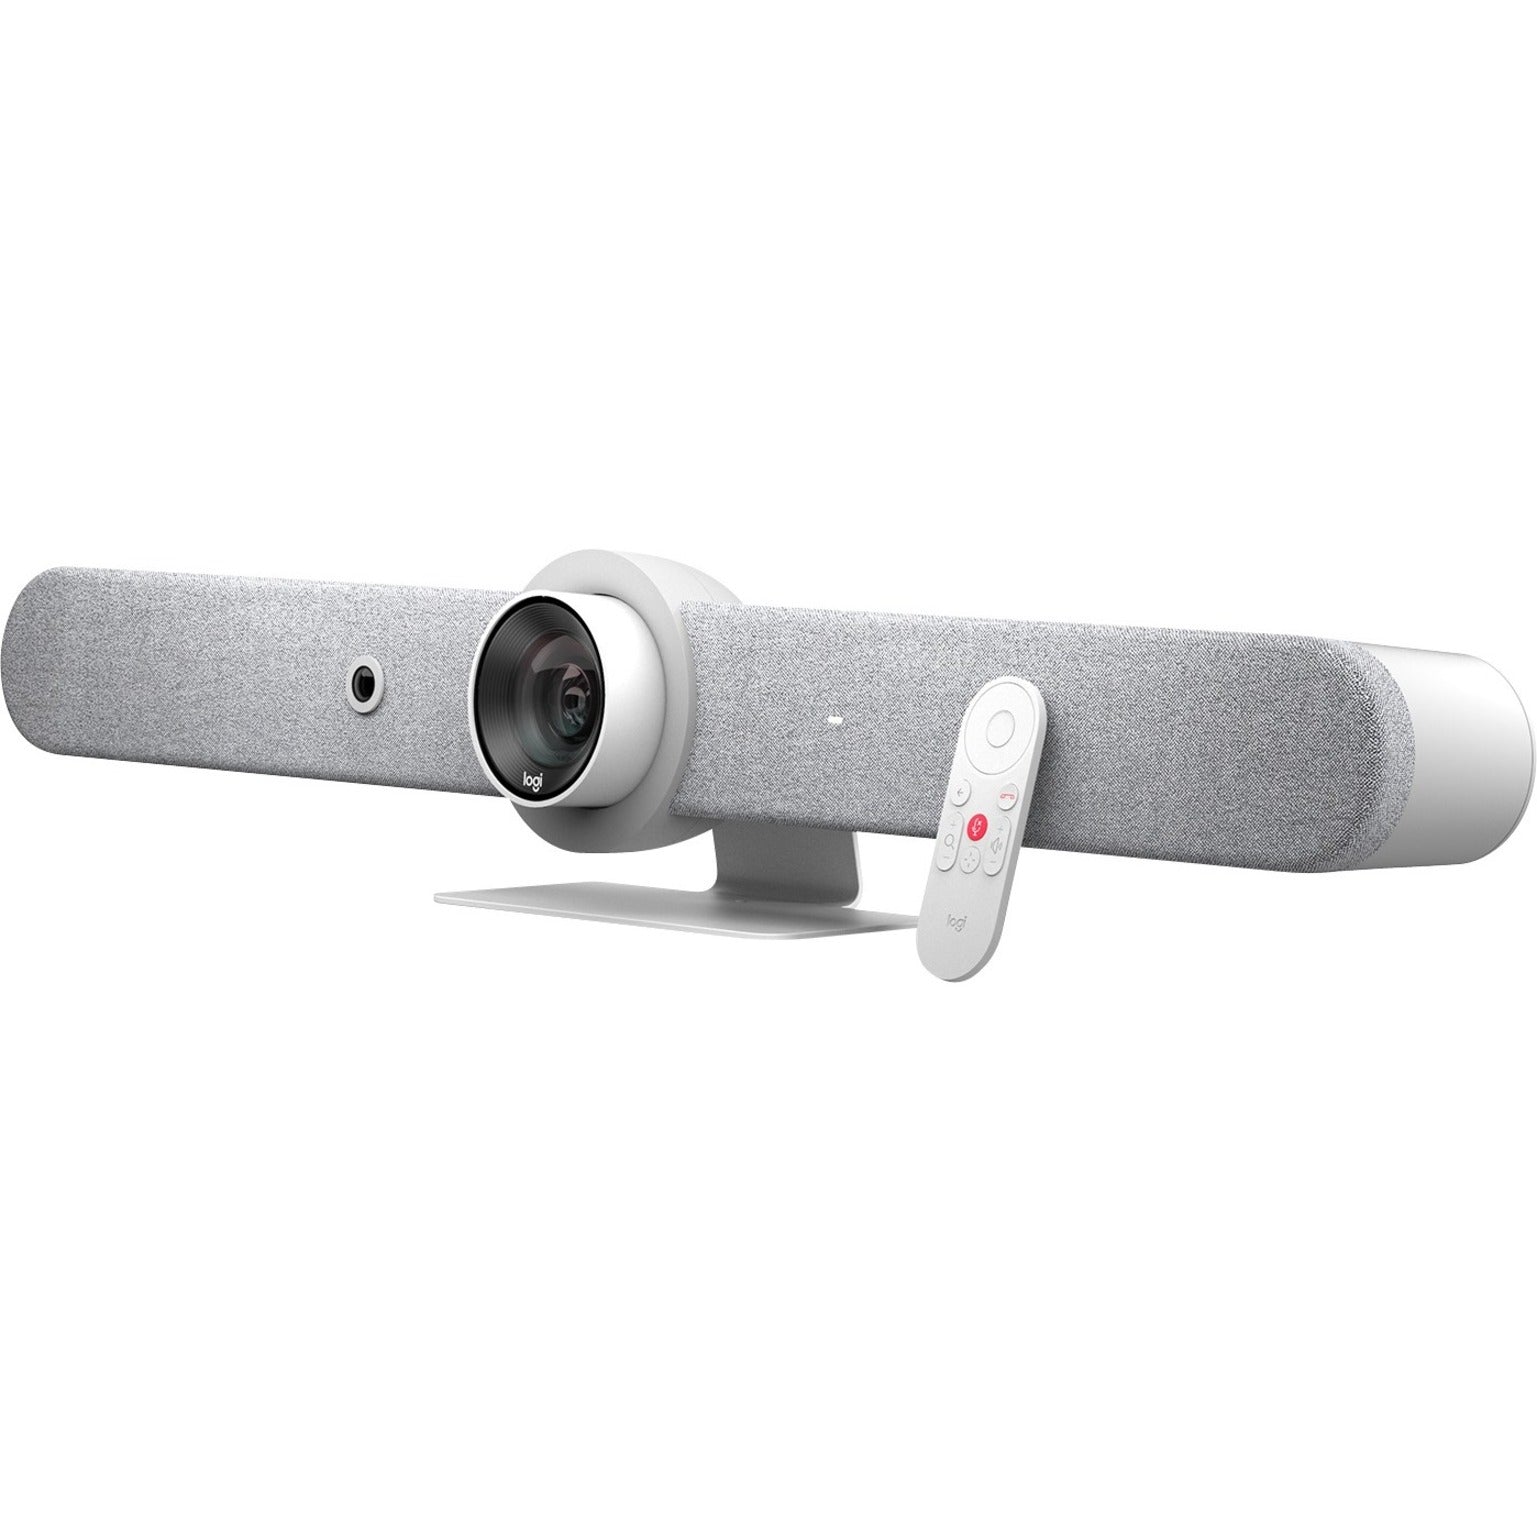 Logitech 960-001348 Rally Bar Mini - White, Video Conferencing Camera, 4x Digital Zoom, 2 Year Limited Warranty